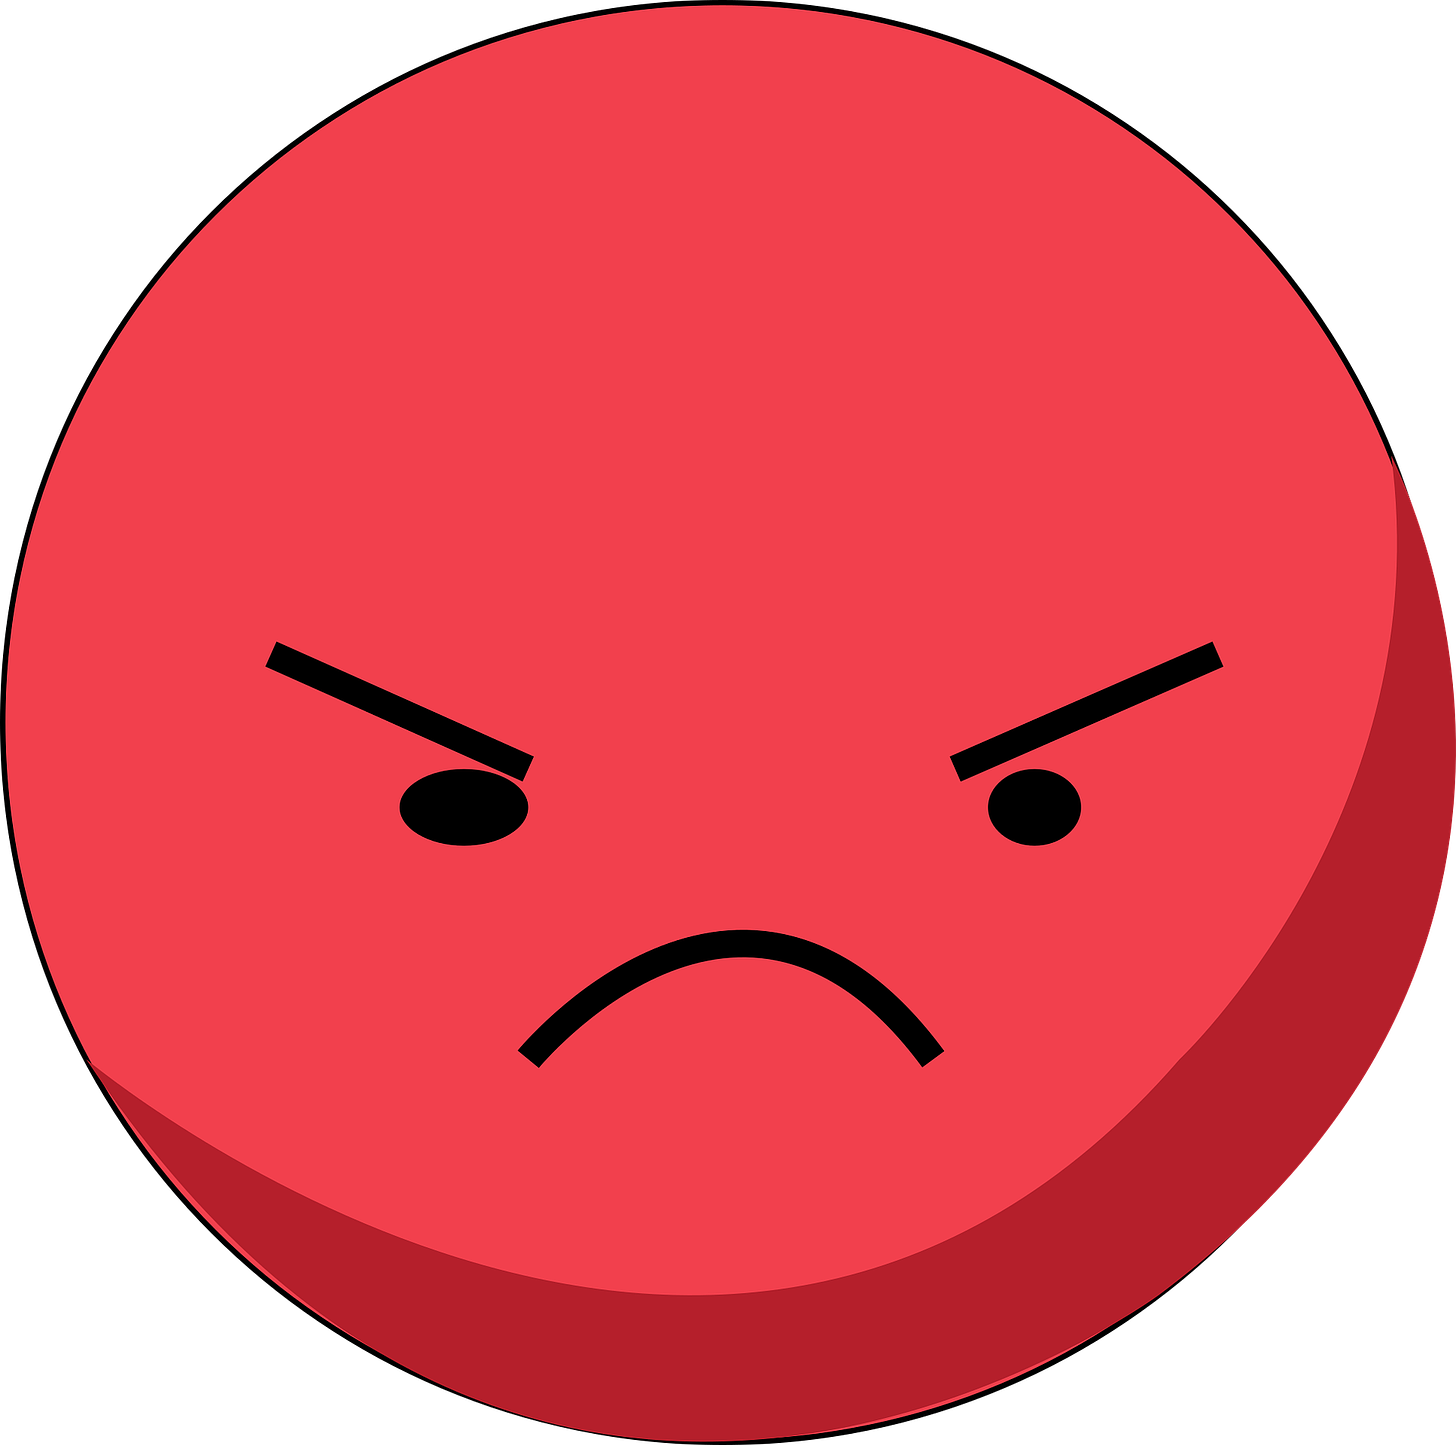 Angry red emoticon